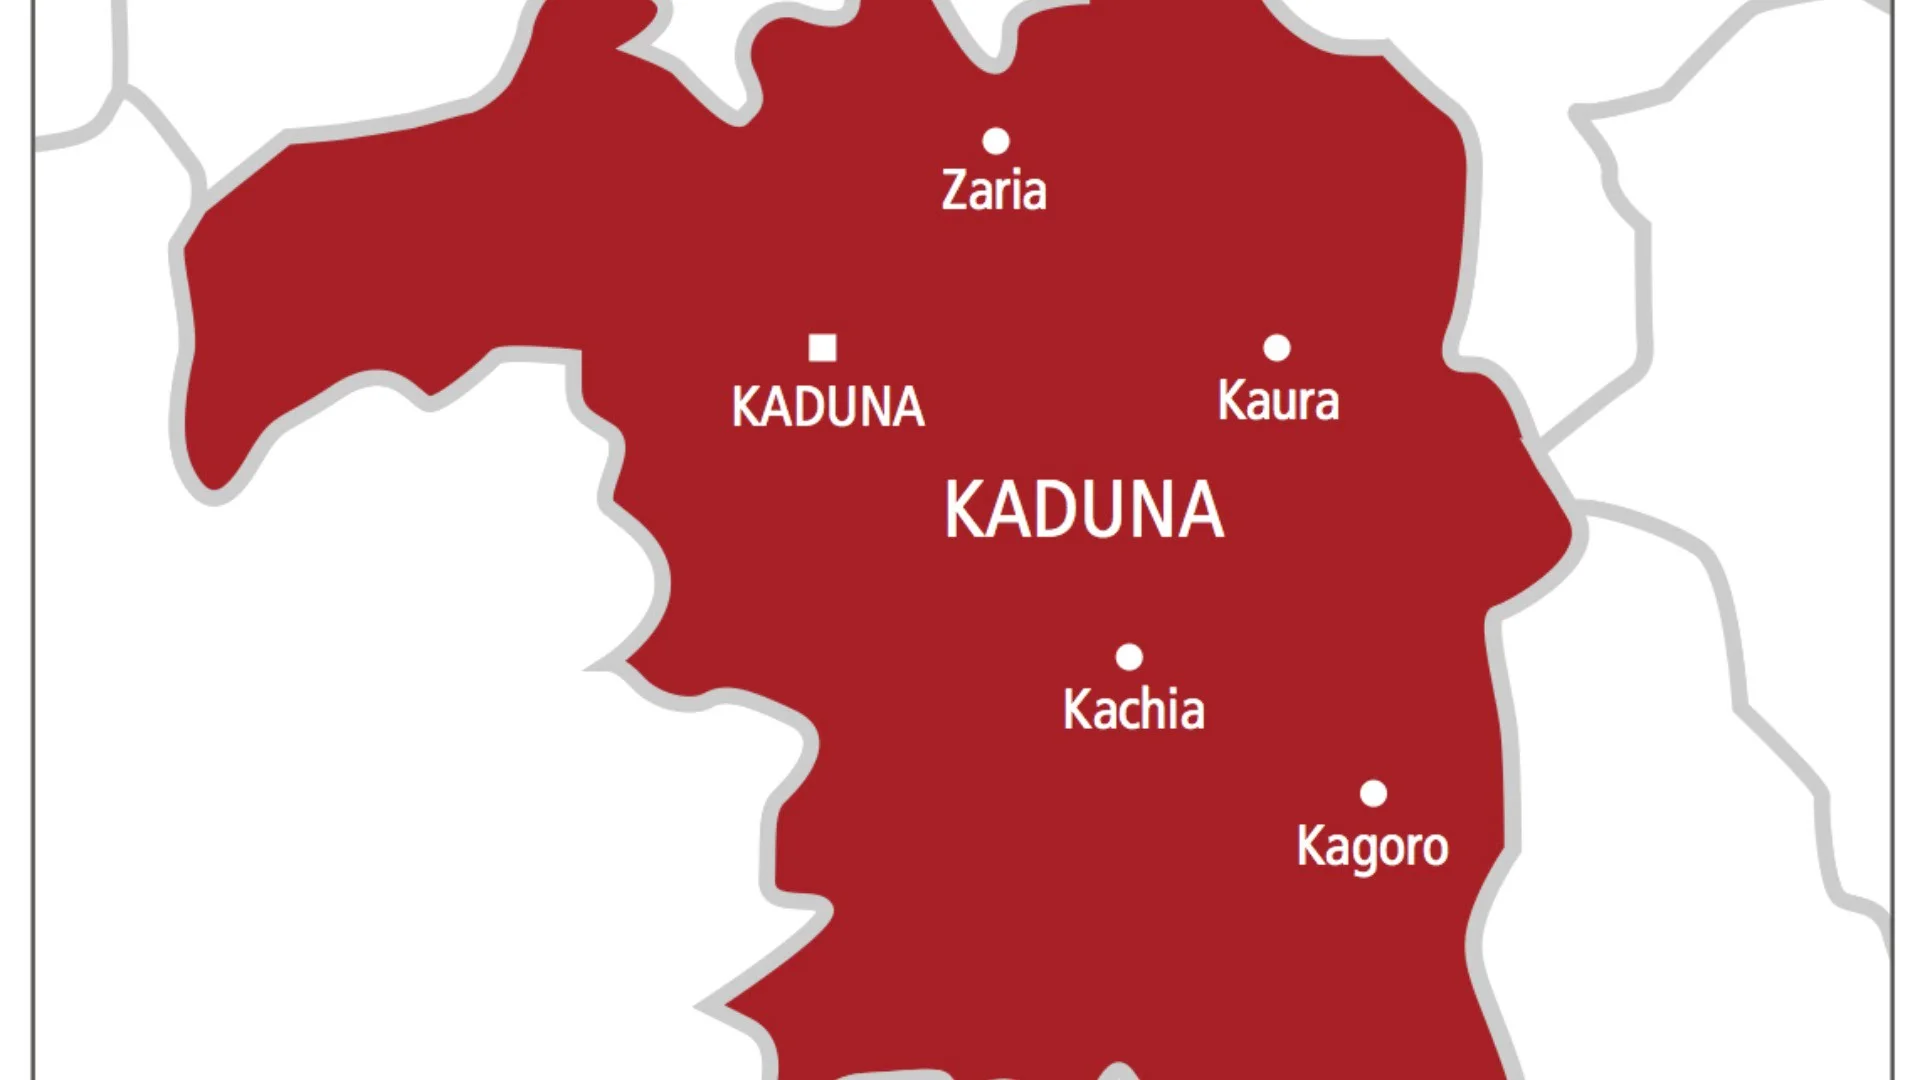 Kaduna youths were denied Nigerian Army enlistment on ethnic grounds – Group alleges